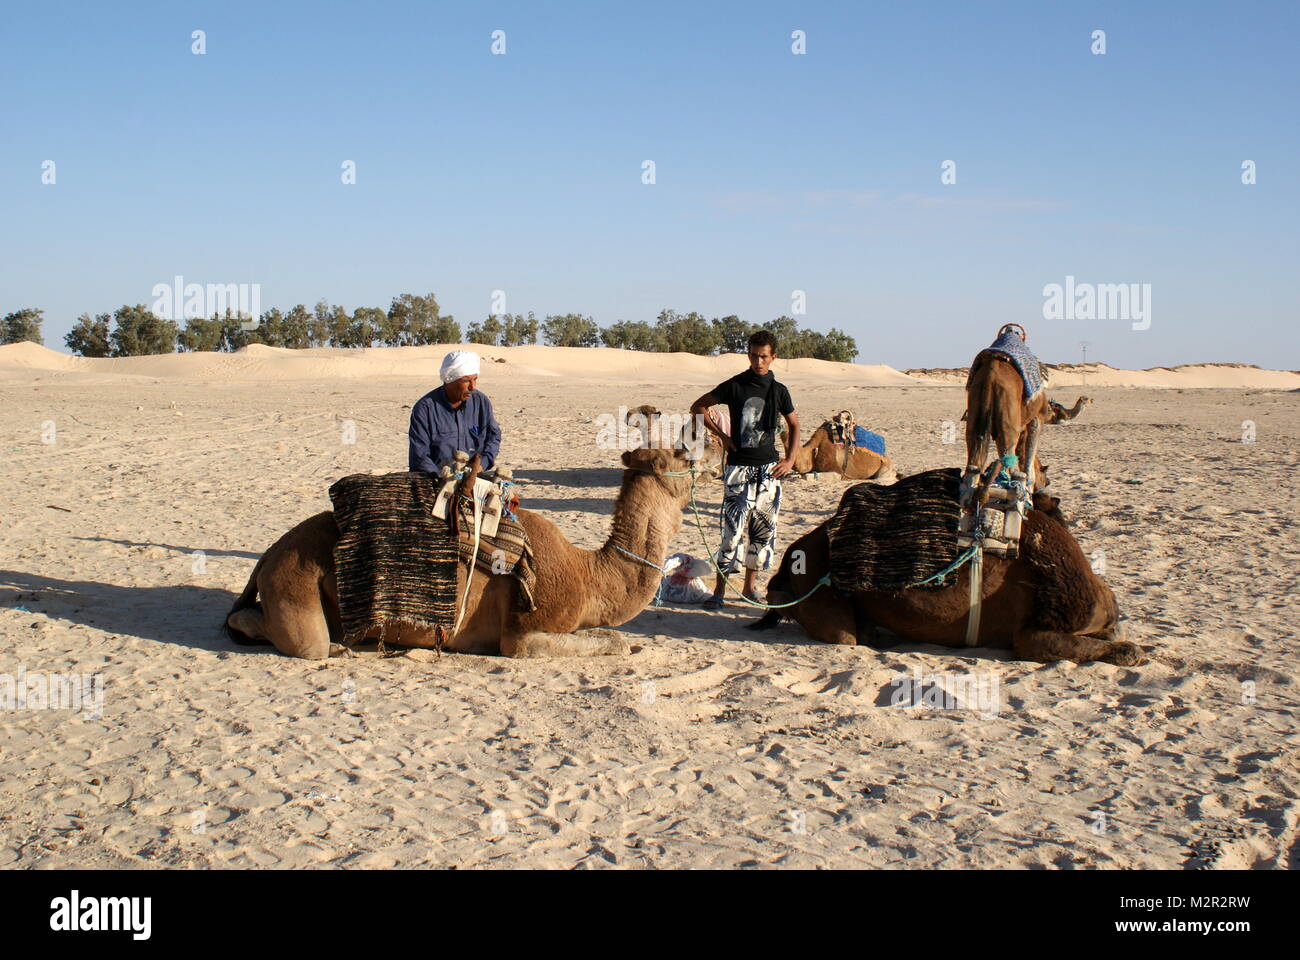 Camels and their Berber guides resting in the desert sand near Douz, Tunisia Stock Photo